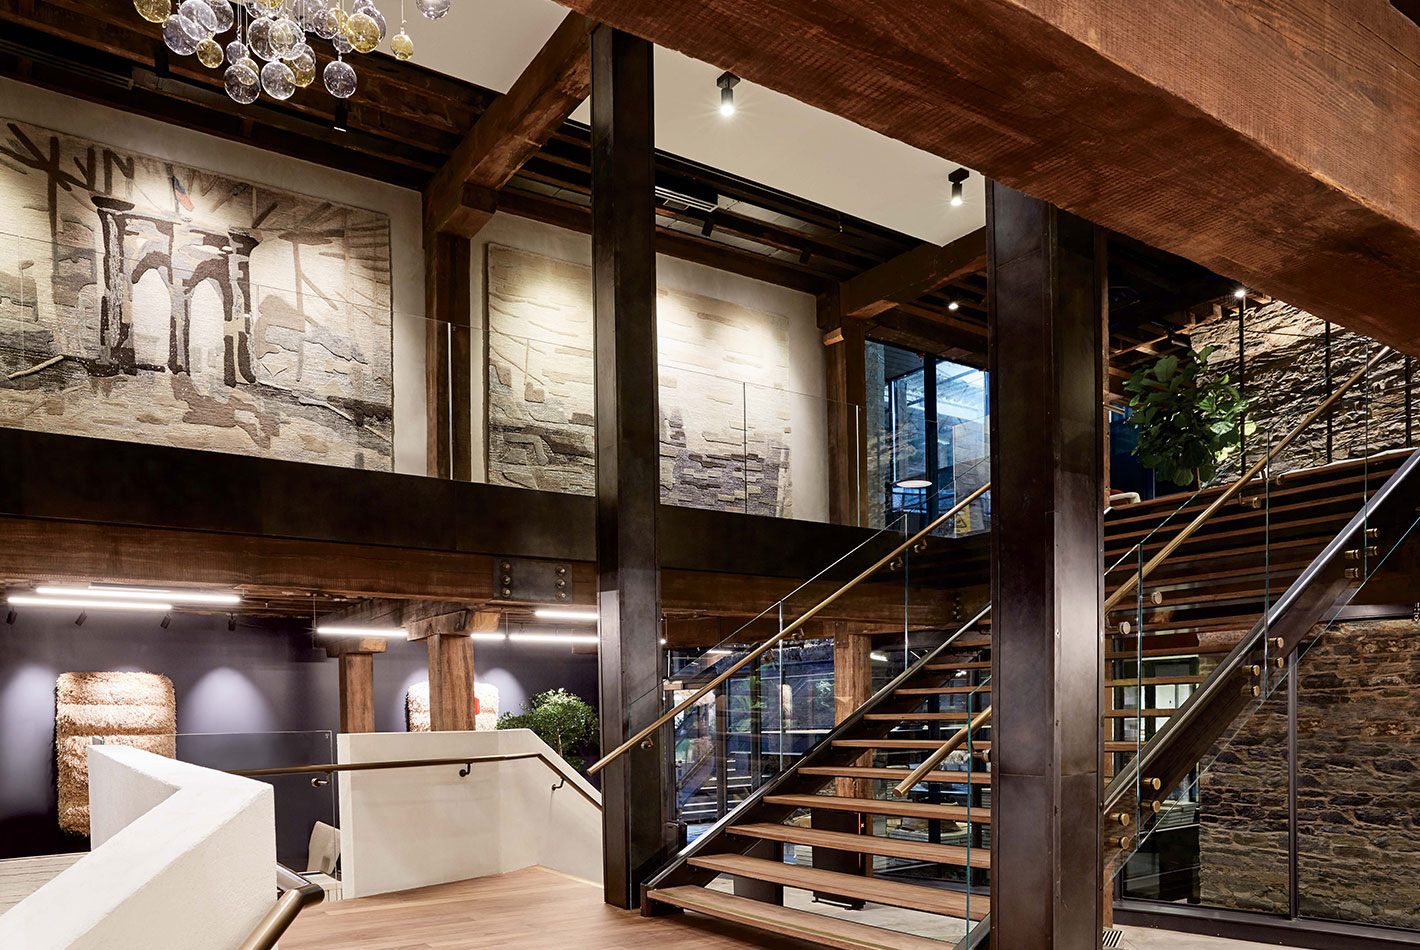 The grand central staircase at West Elm's Headquarters in DUMBO Brooklyn.